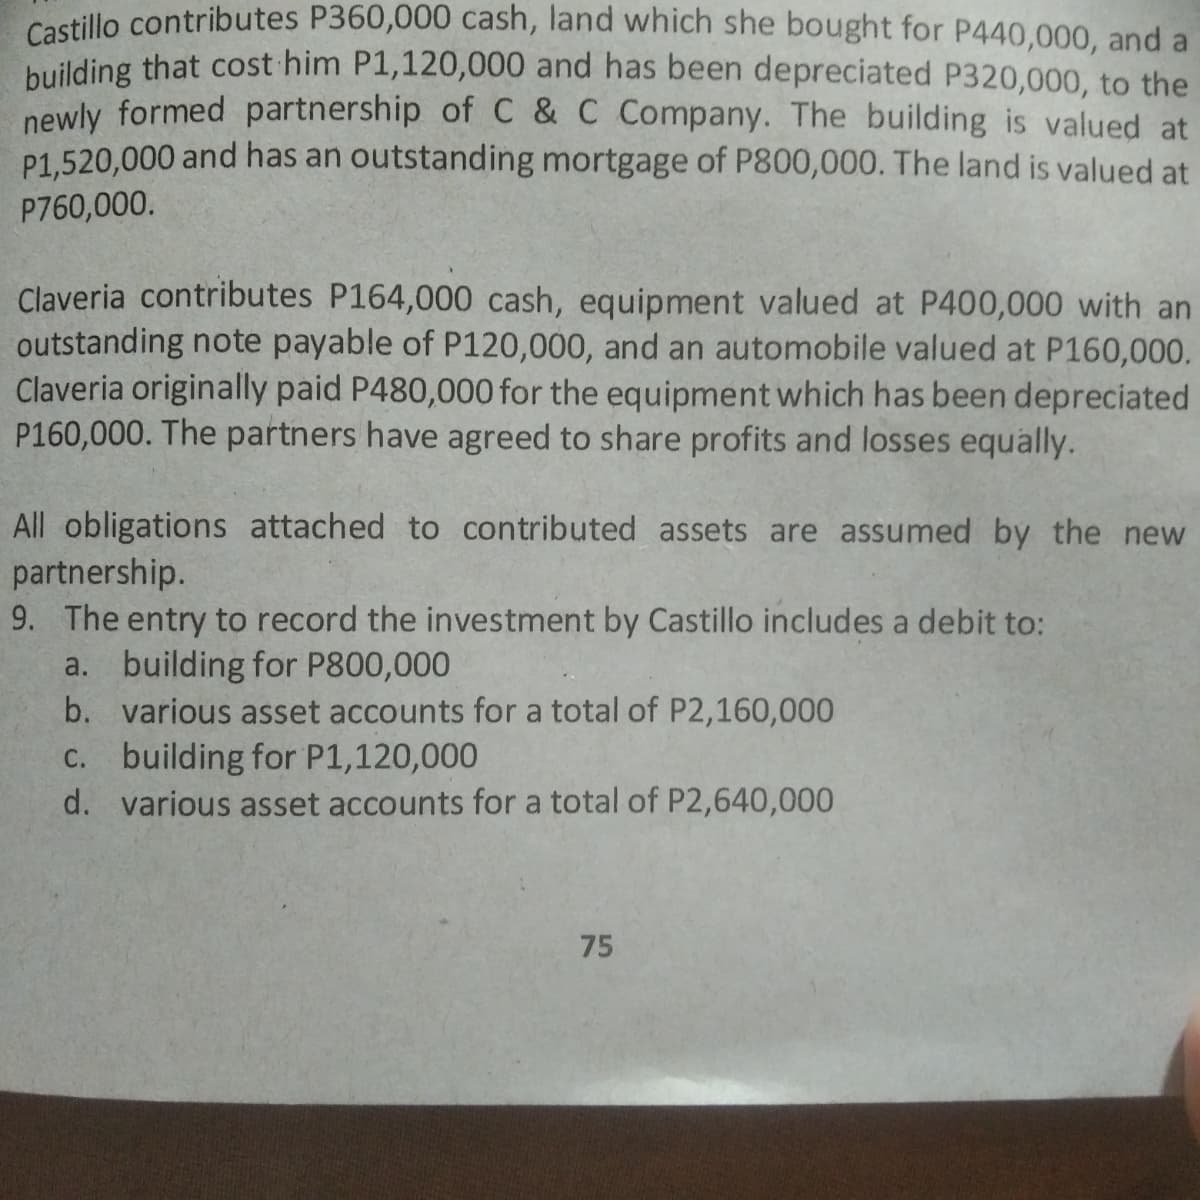 Castillo contributes P360,000 cash, land which she bought for P440,000, and a
building that cost him P1,120,000 and has been depreciated P320,000, to the
newly formed partnership of C & C Company. The building is valued at
P1,520,000 and has an outstanding mortgage of P800,000. The land is valued at
P760,000.
Claveria contributes P164,000 cash, equipment valued at P400,000 with an
outstanding note payable of P120,000, and an automobile valued at P160,000.
Claveria originally paid P480,000 for the equipment which has been depreciated
P160,000. The partners have agreed to share profits and losses equally.
All obligations attached to contributed assets are assumed by the new
partnership.
9. The entry to record the investment by Castillo includes a debit to:
a. building for P800,000
b. various asset accounts for a total of P2,160,000
C. building for P1,120,000
d. various asset accounts for a total of P2,640,000
75
